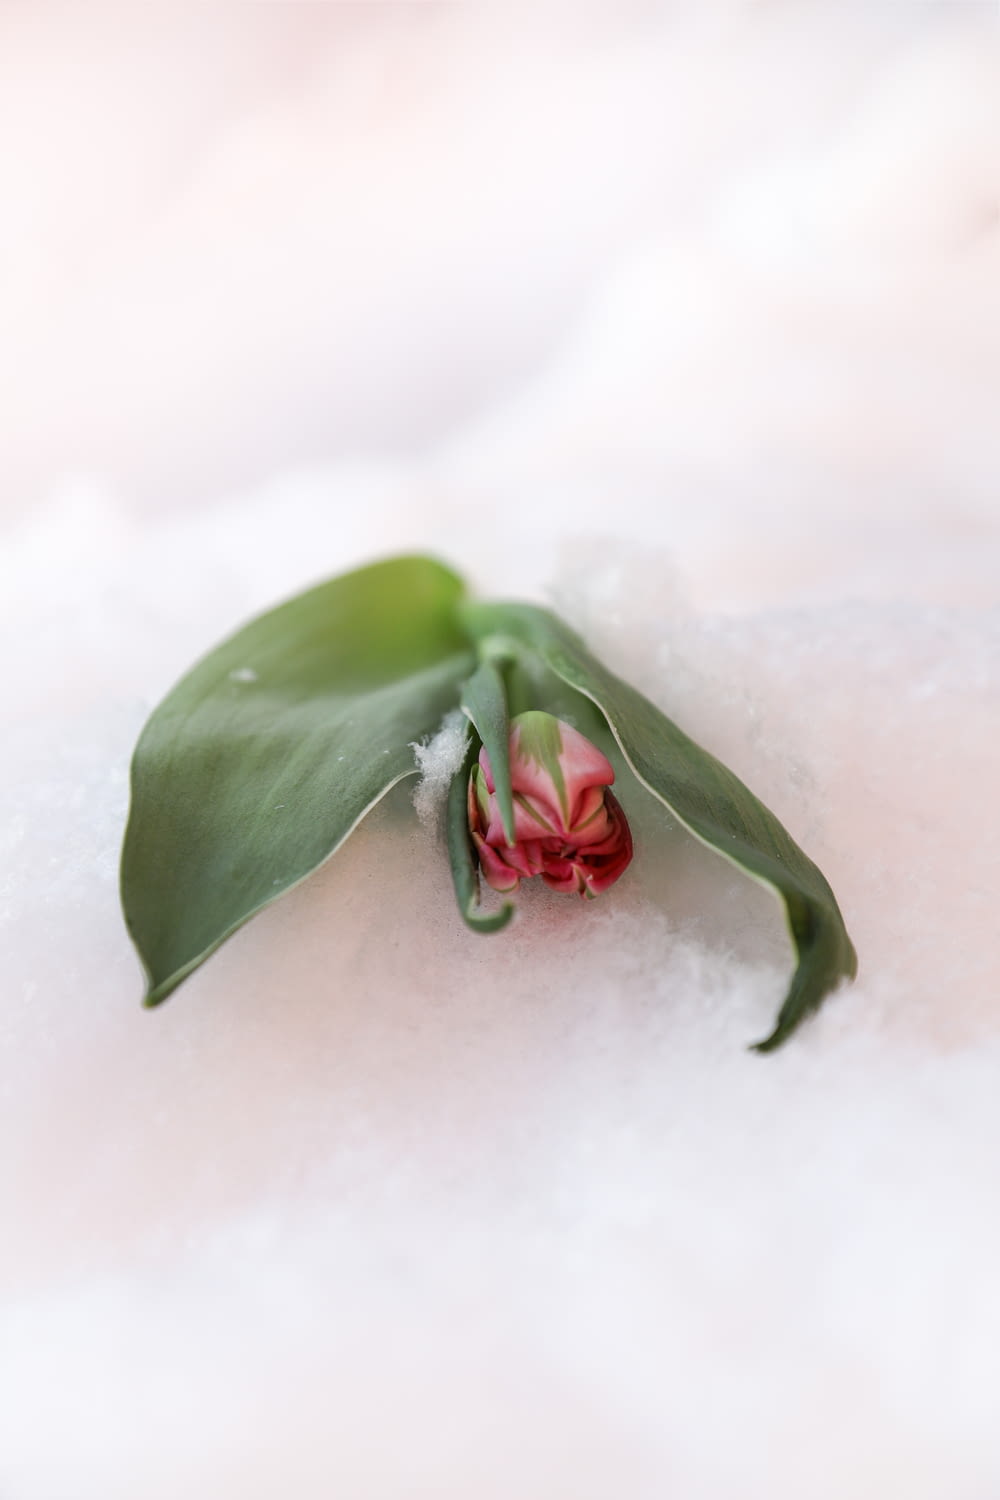 a small red flower sitting on top of a snow covered ground